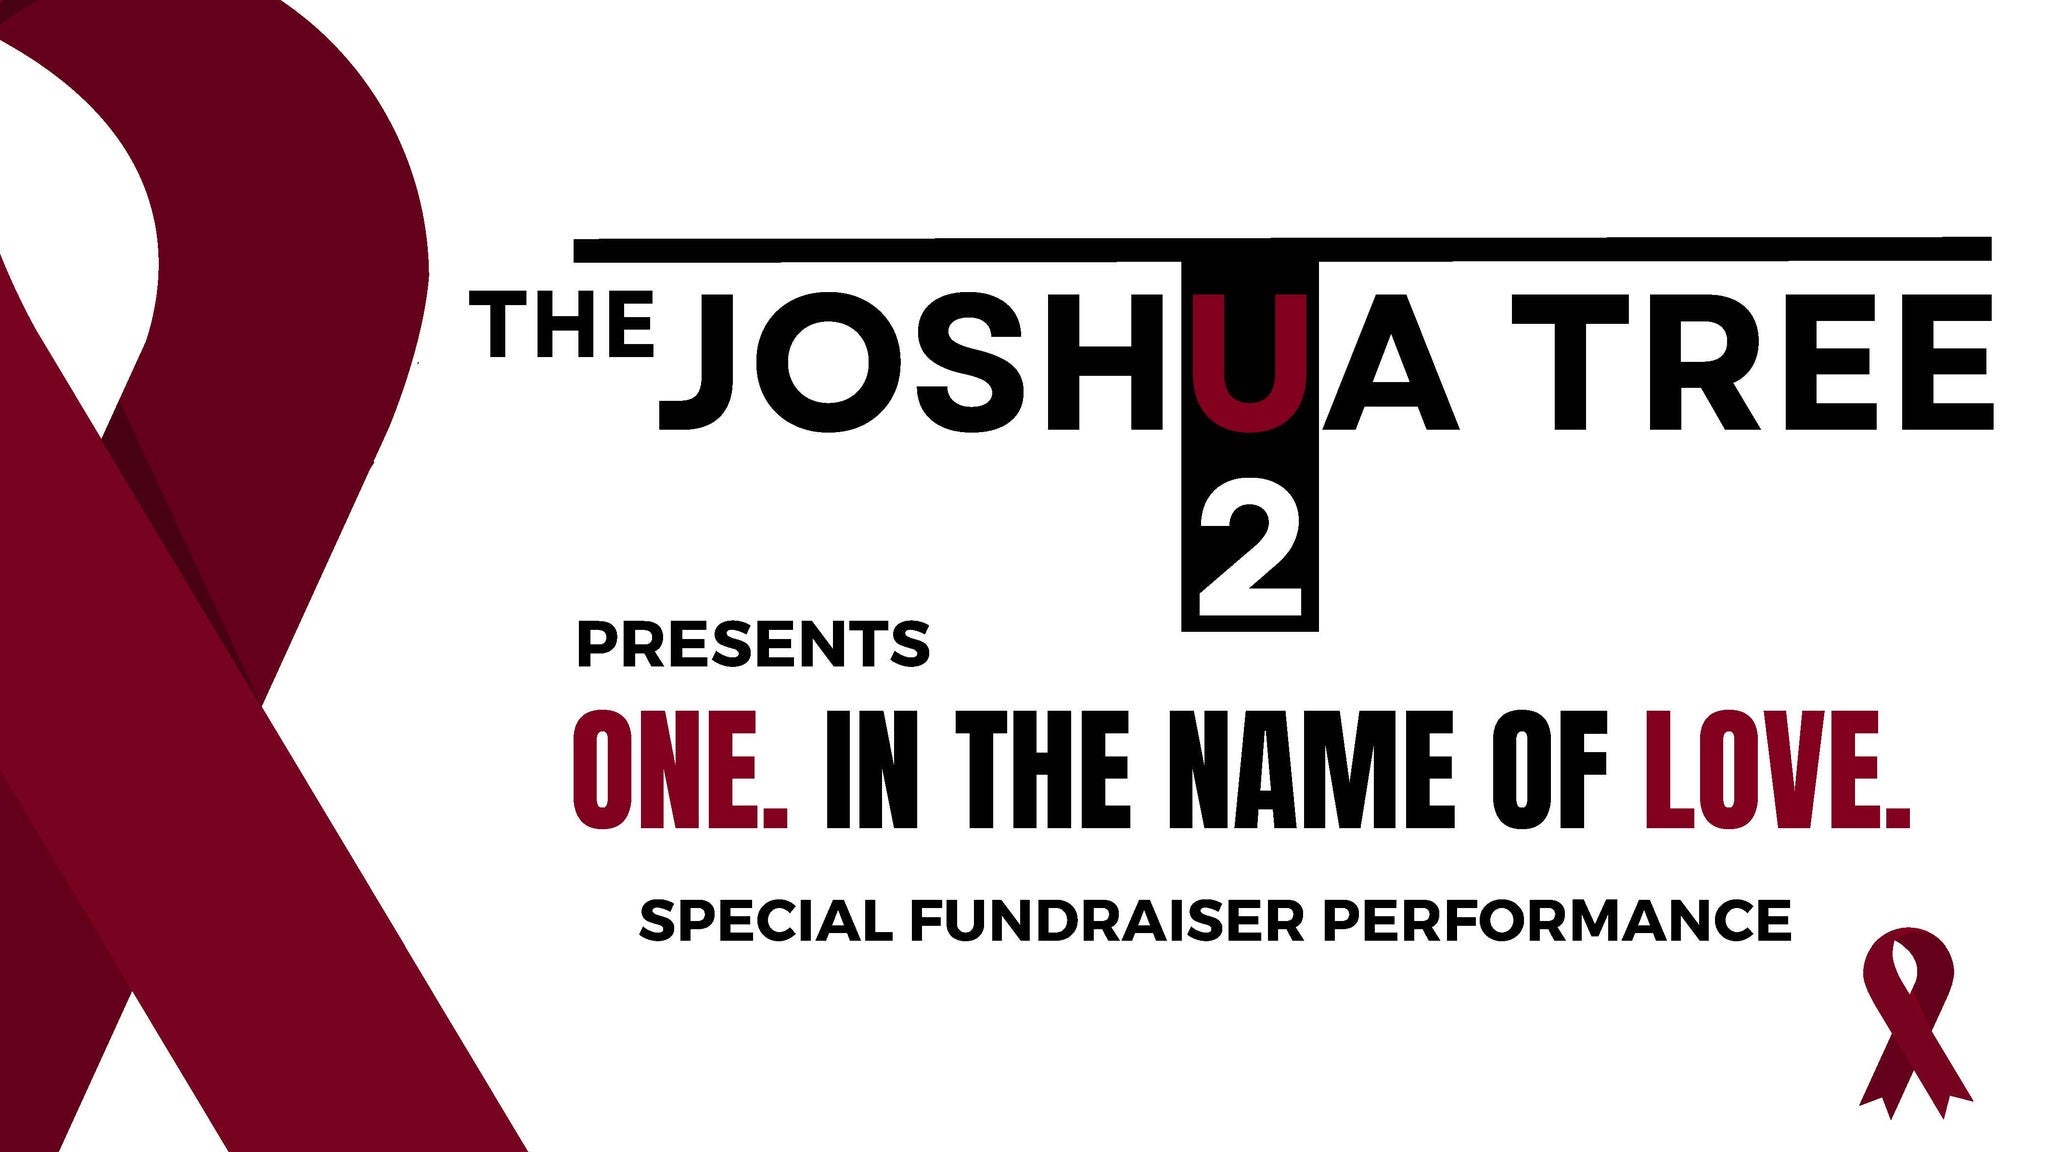 The Joshua Tree One. In The Name Of Love Fundraiser